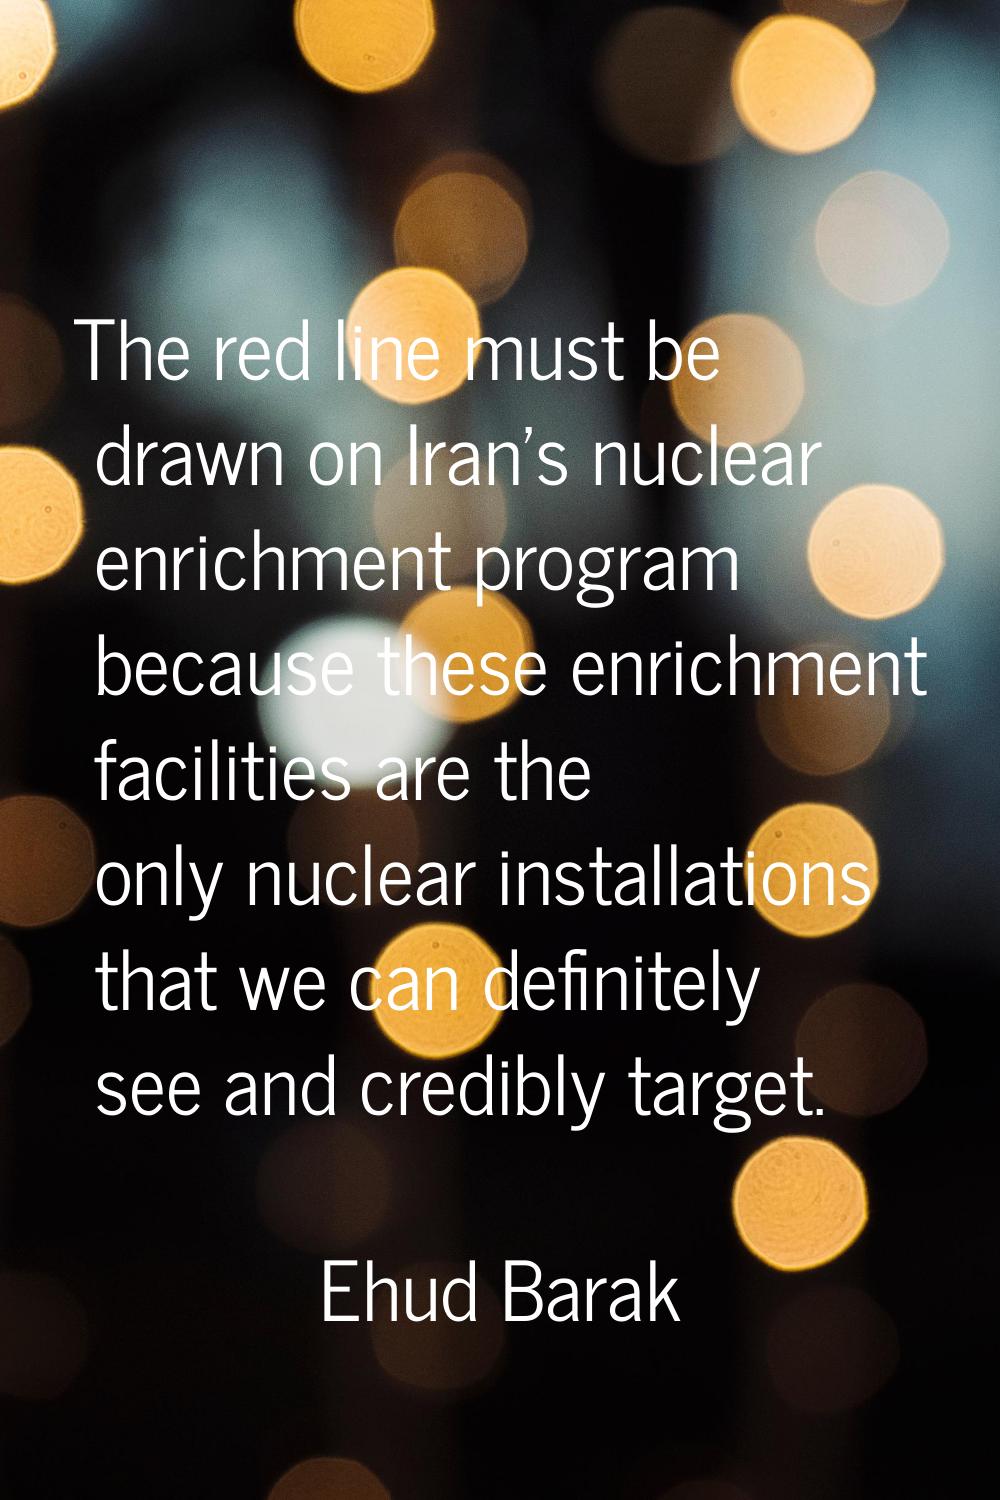 The red line must be drawn on Iran's nuclear enrichment program because these enrichment facilities